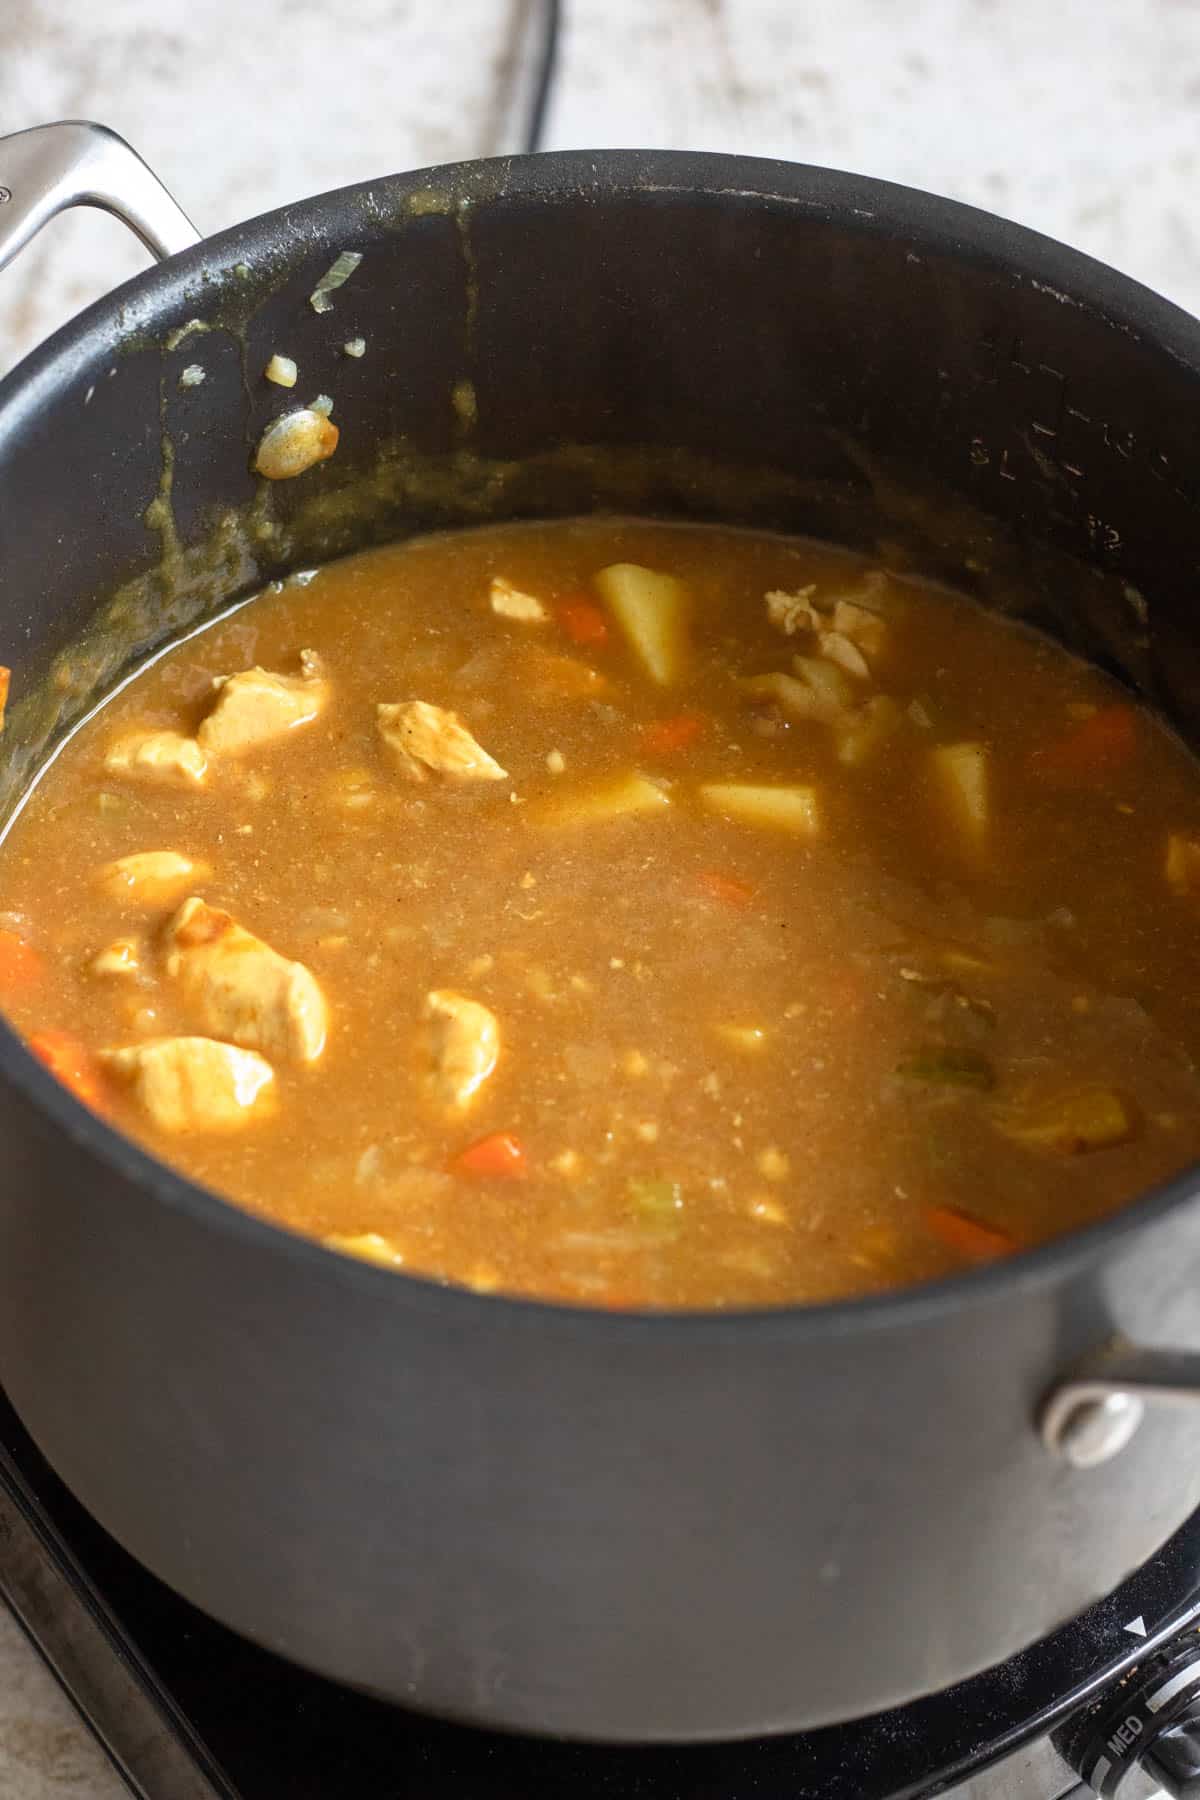 Curry pieces added to the pot to create flavor and help thicken the mixture as it simmers. 